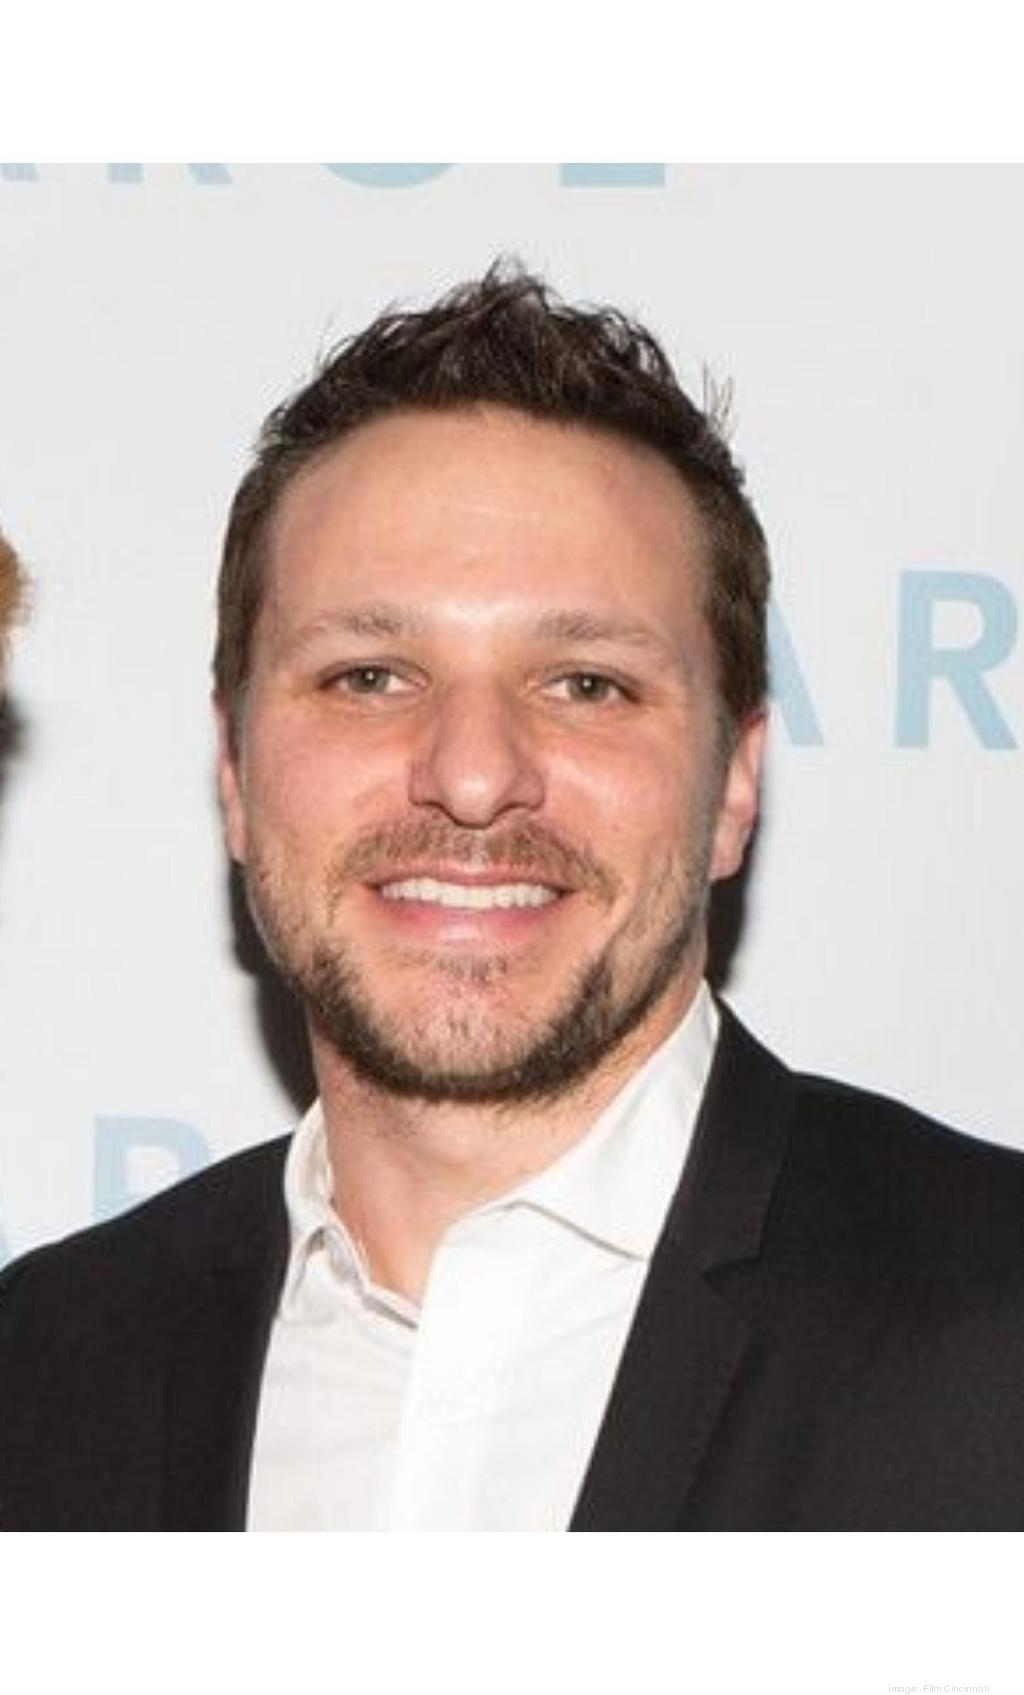 What Is Drew Lachey Doing Now?